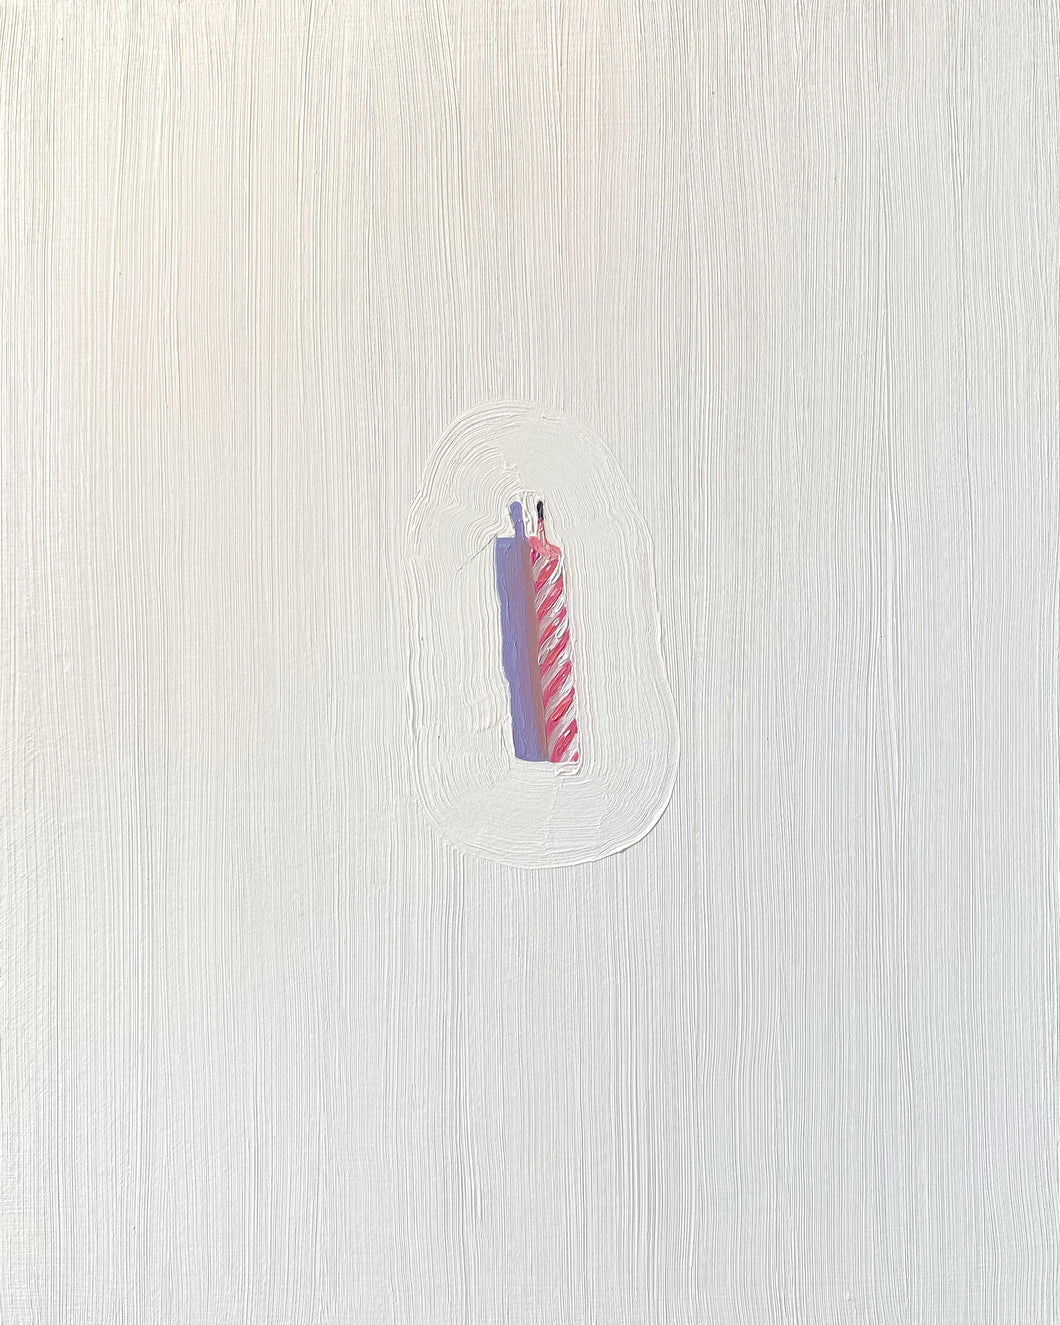 Negative Space Birthday Candle